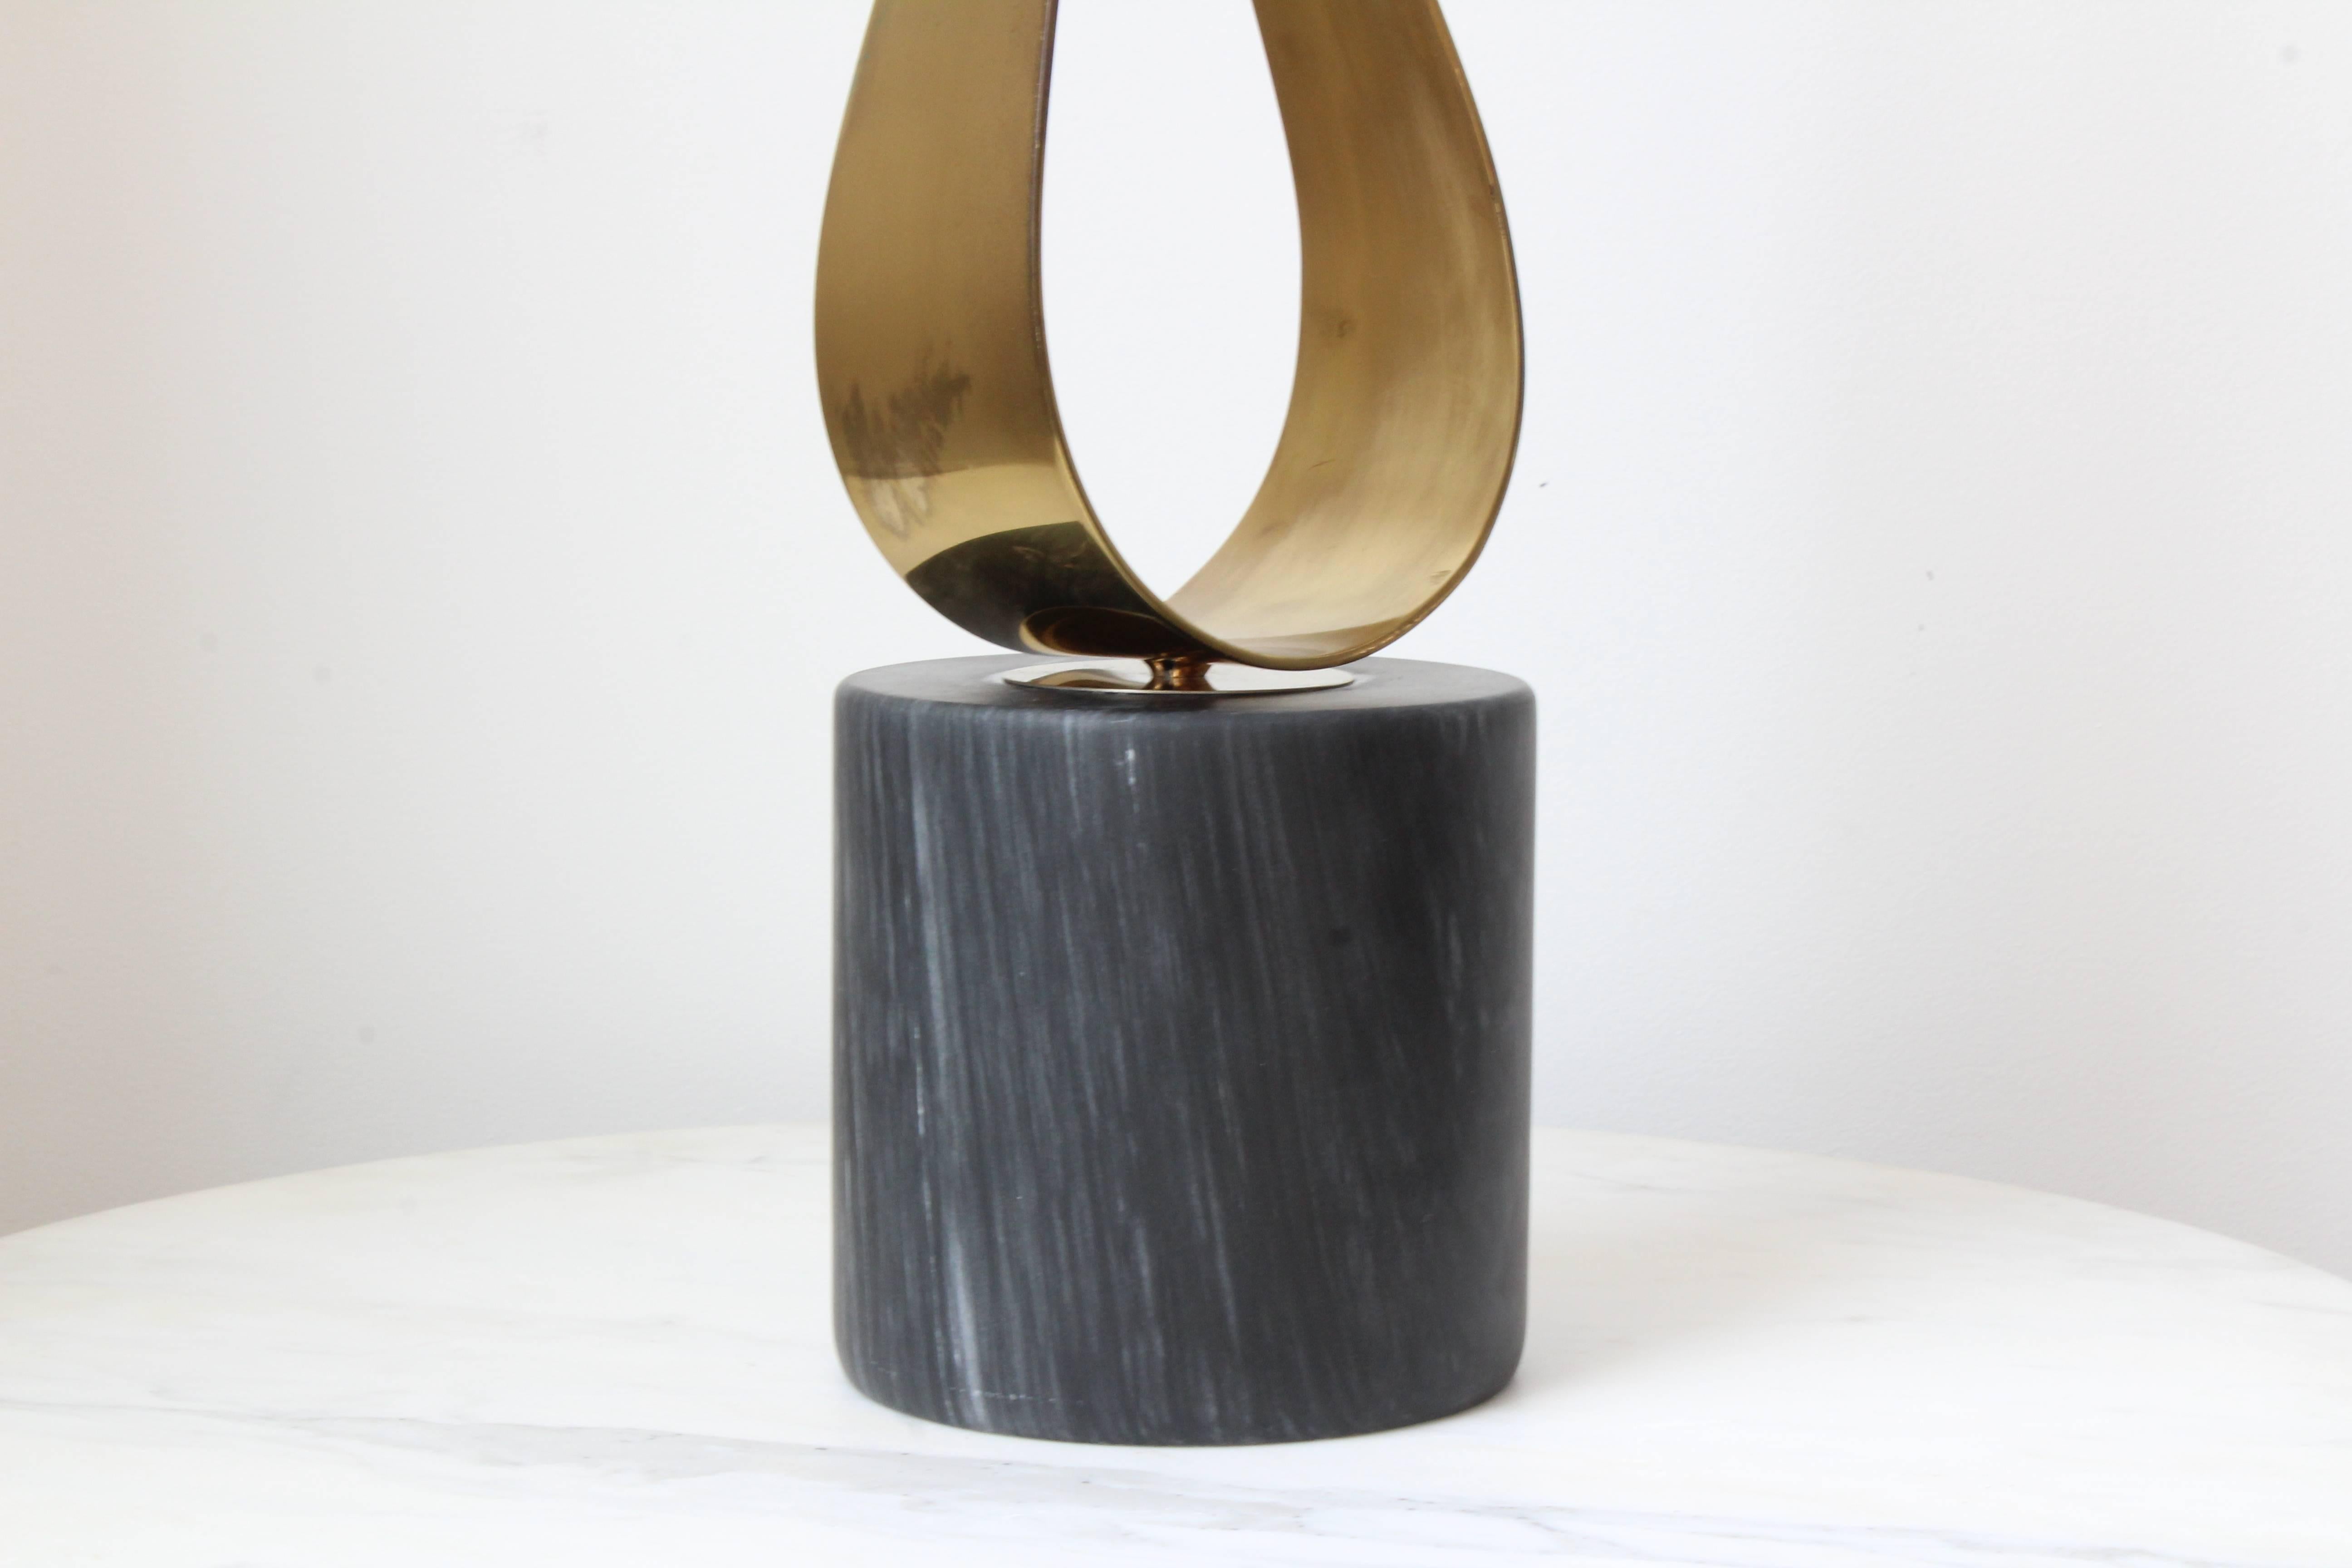 A fabulous 1970s whimsical brass sculpture on a honed marble base. Signed by Curtis Jere.